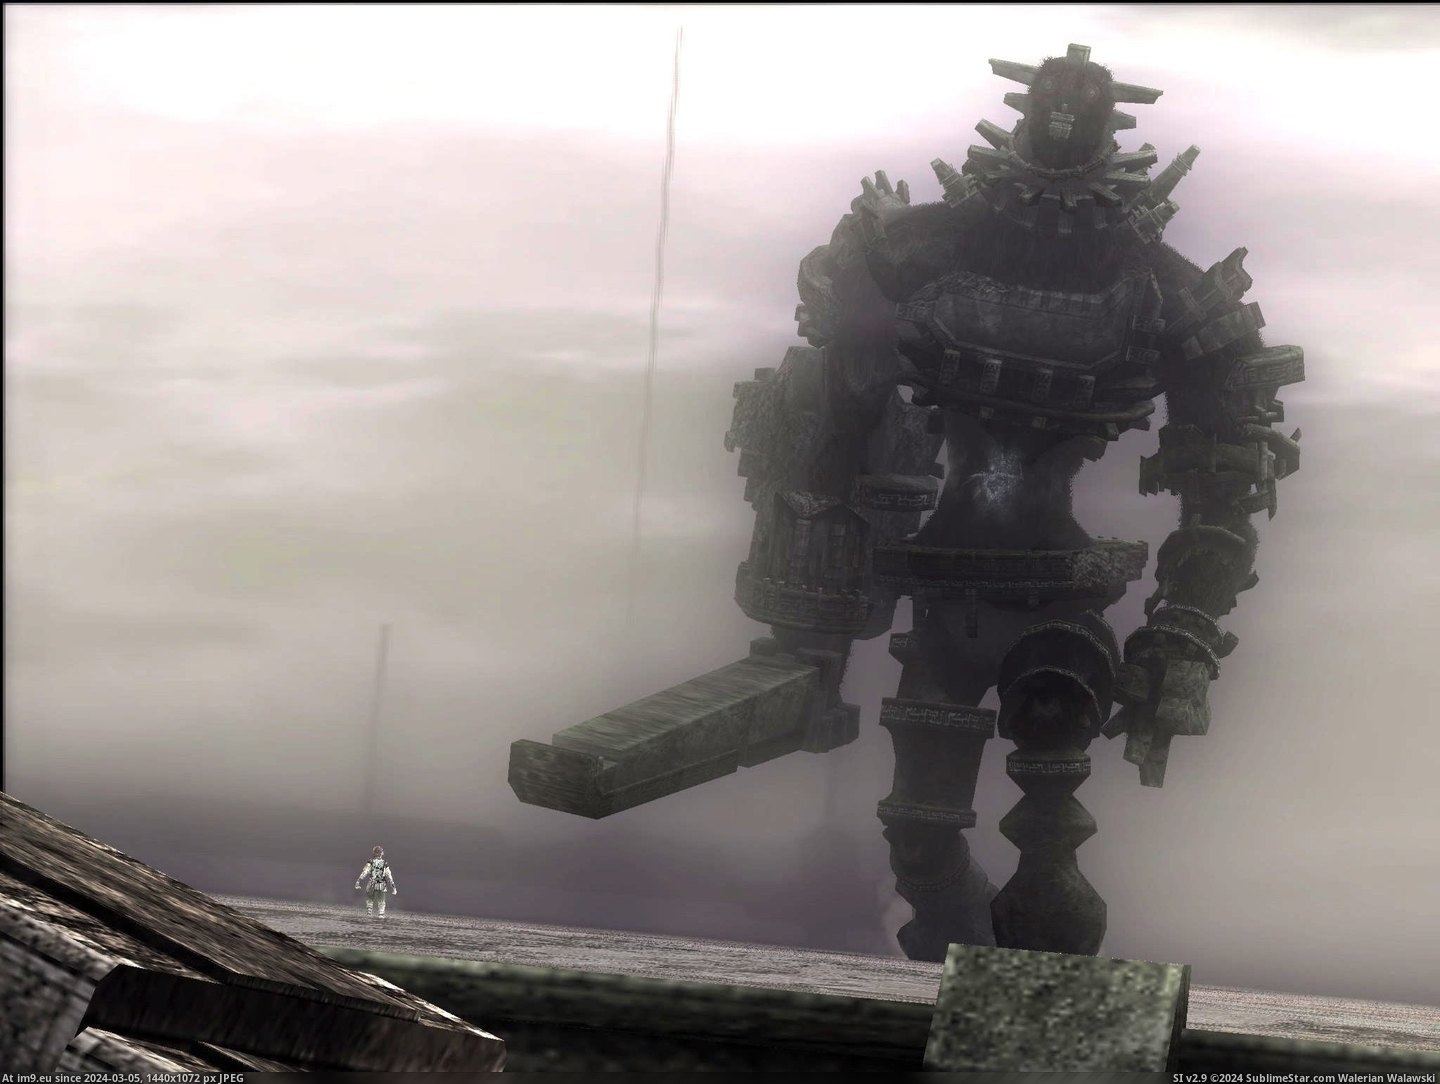 #Game #Shadow #Colossus #Video Video Game Shadow Of The Colossus 5657 Pic. (Изображение из альбом Games Wallpapers))